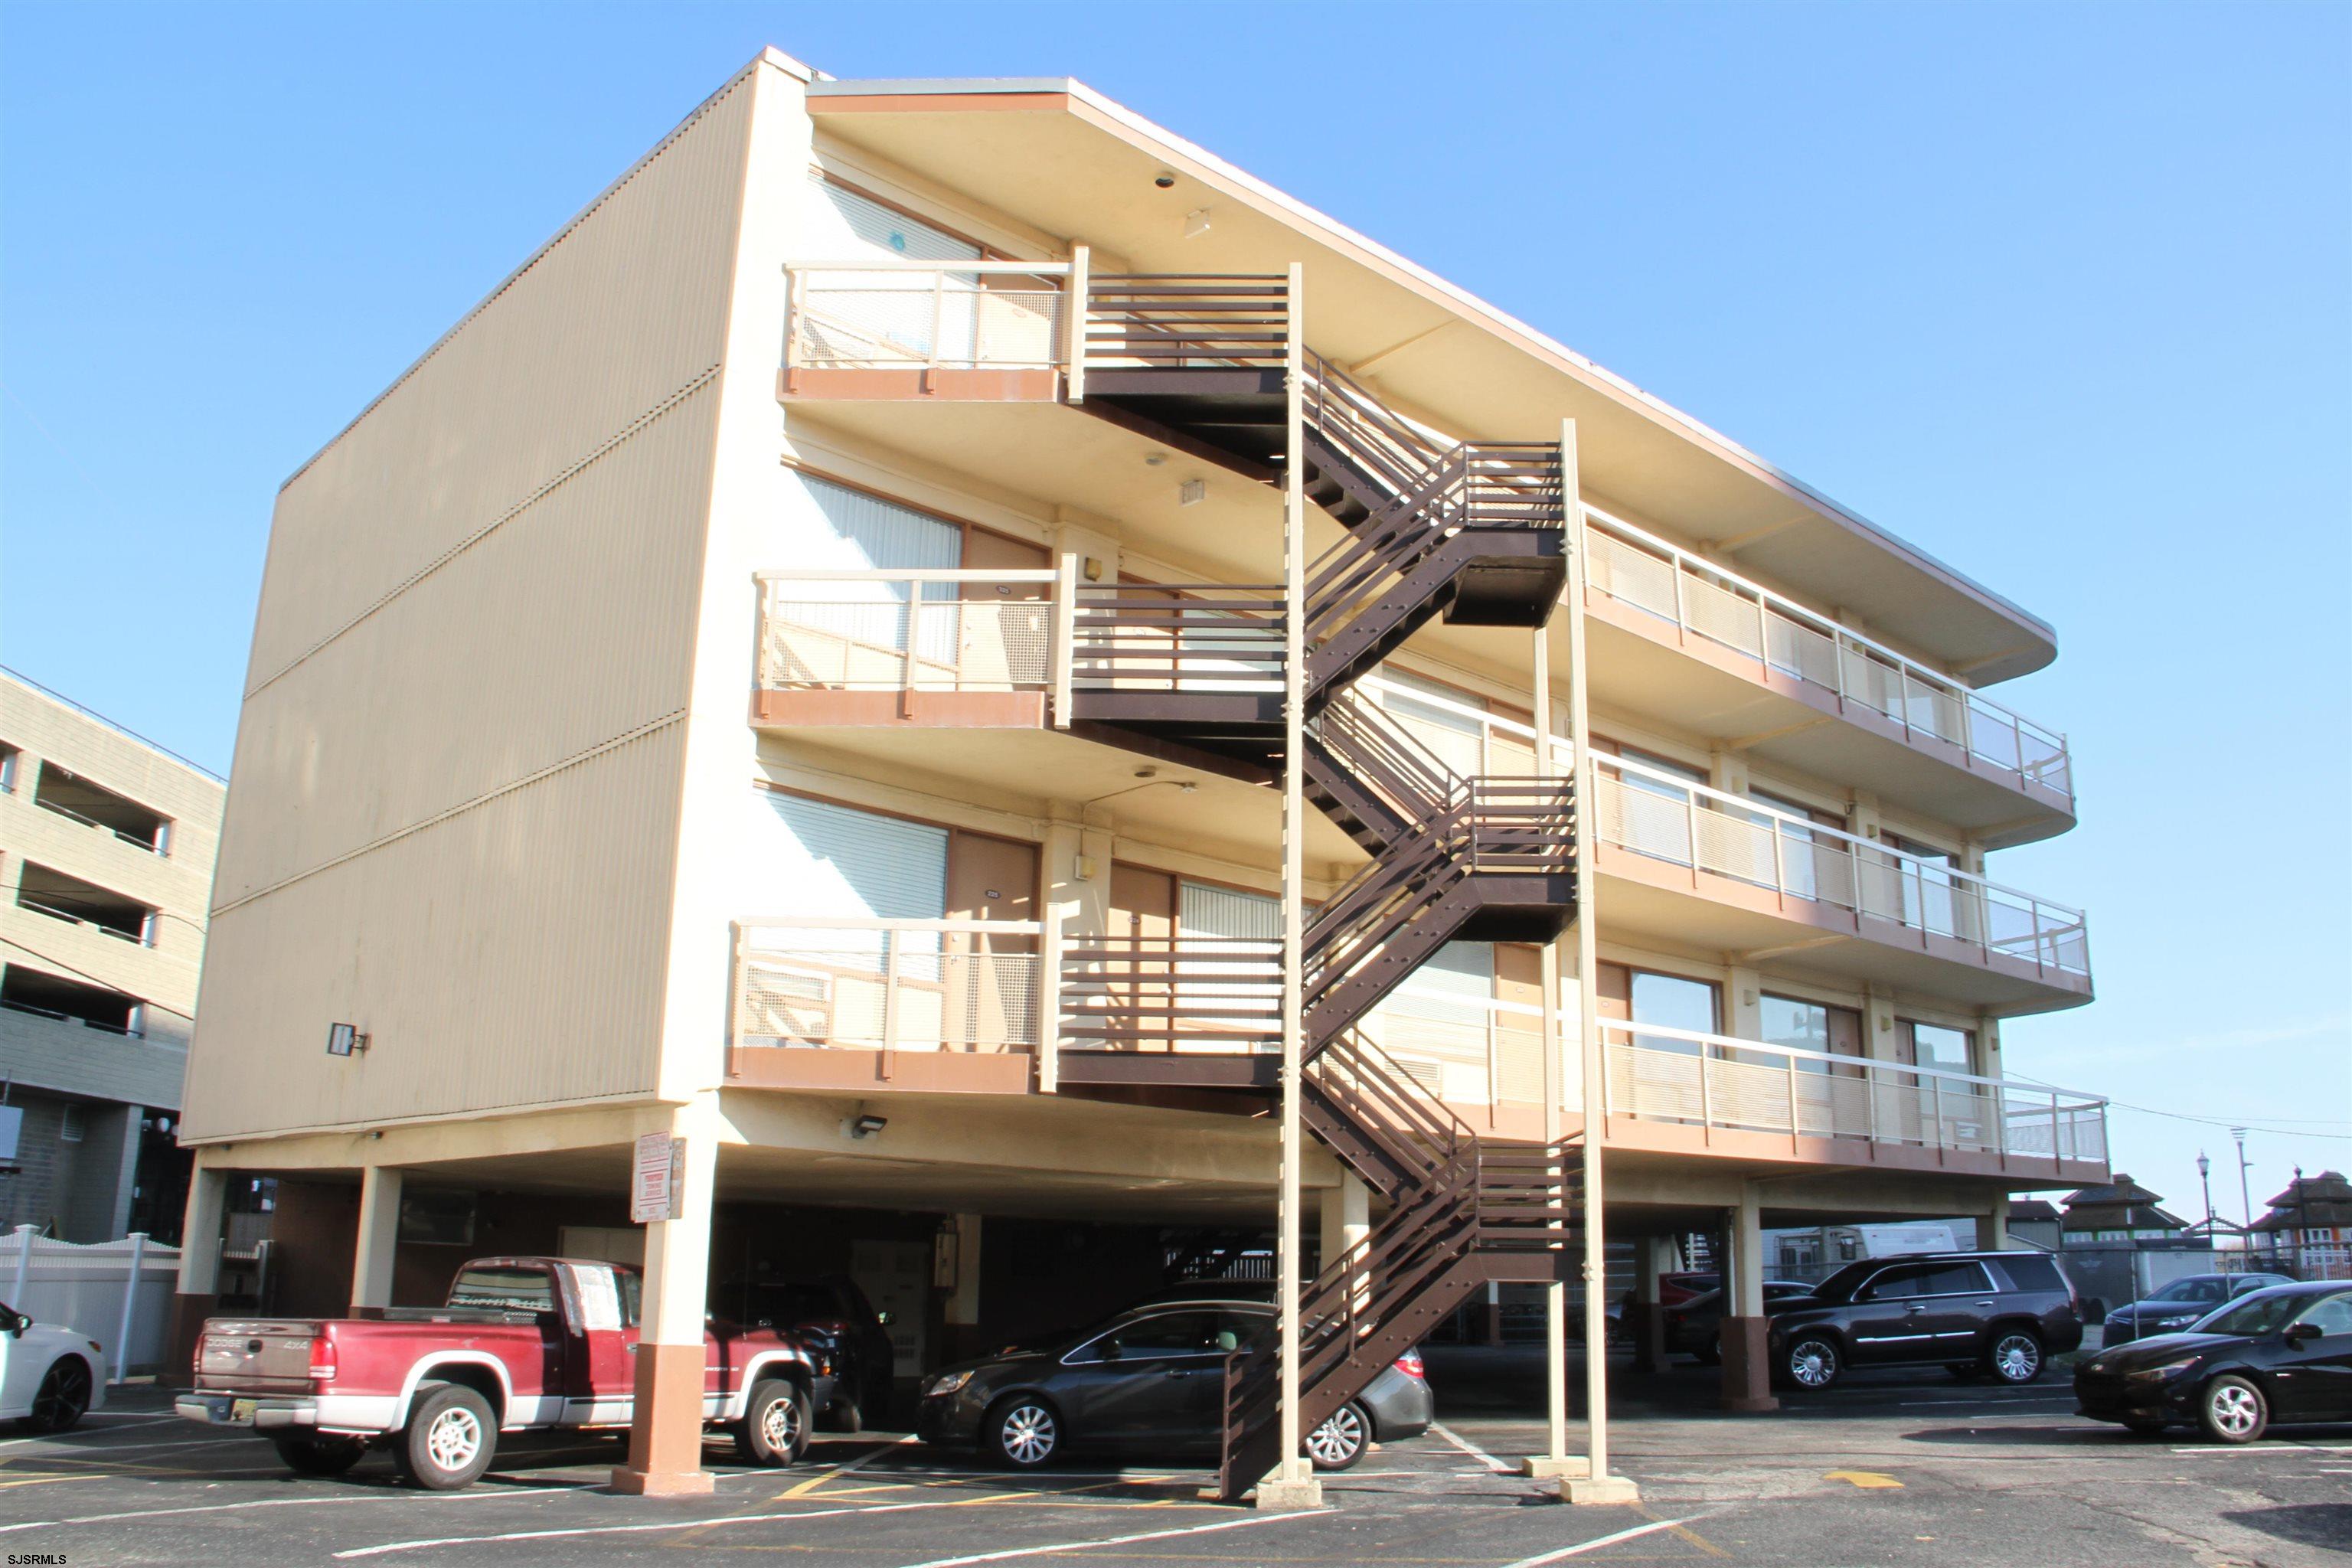 a front view of a building with parking